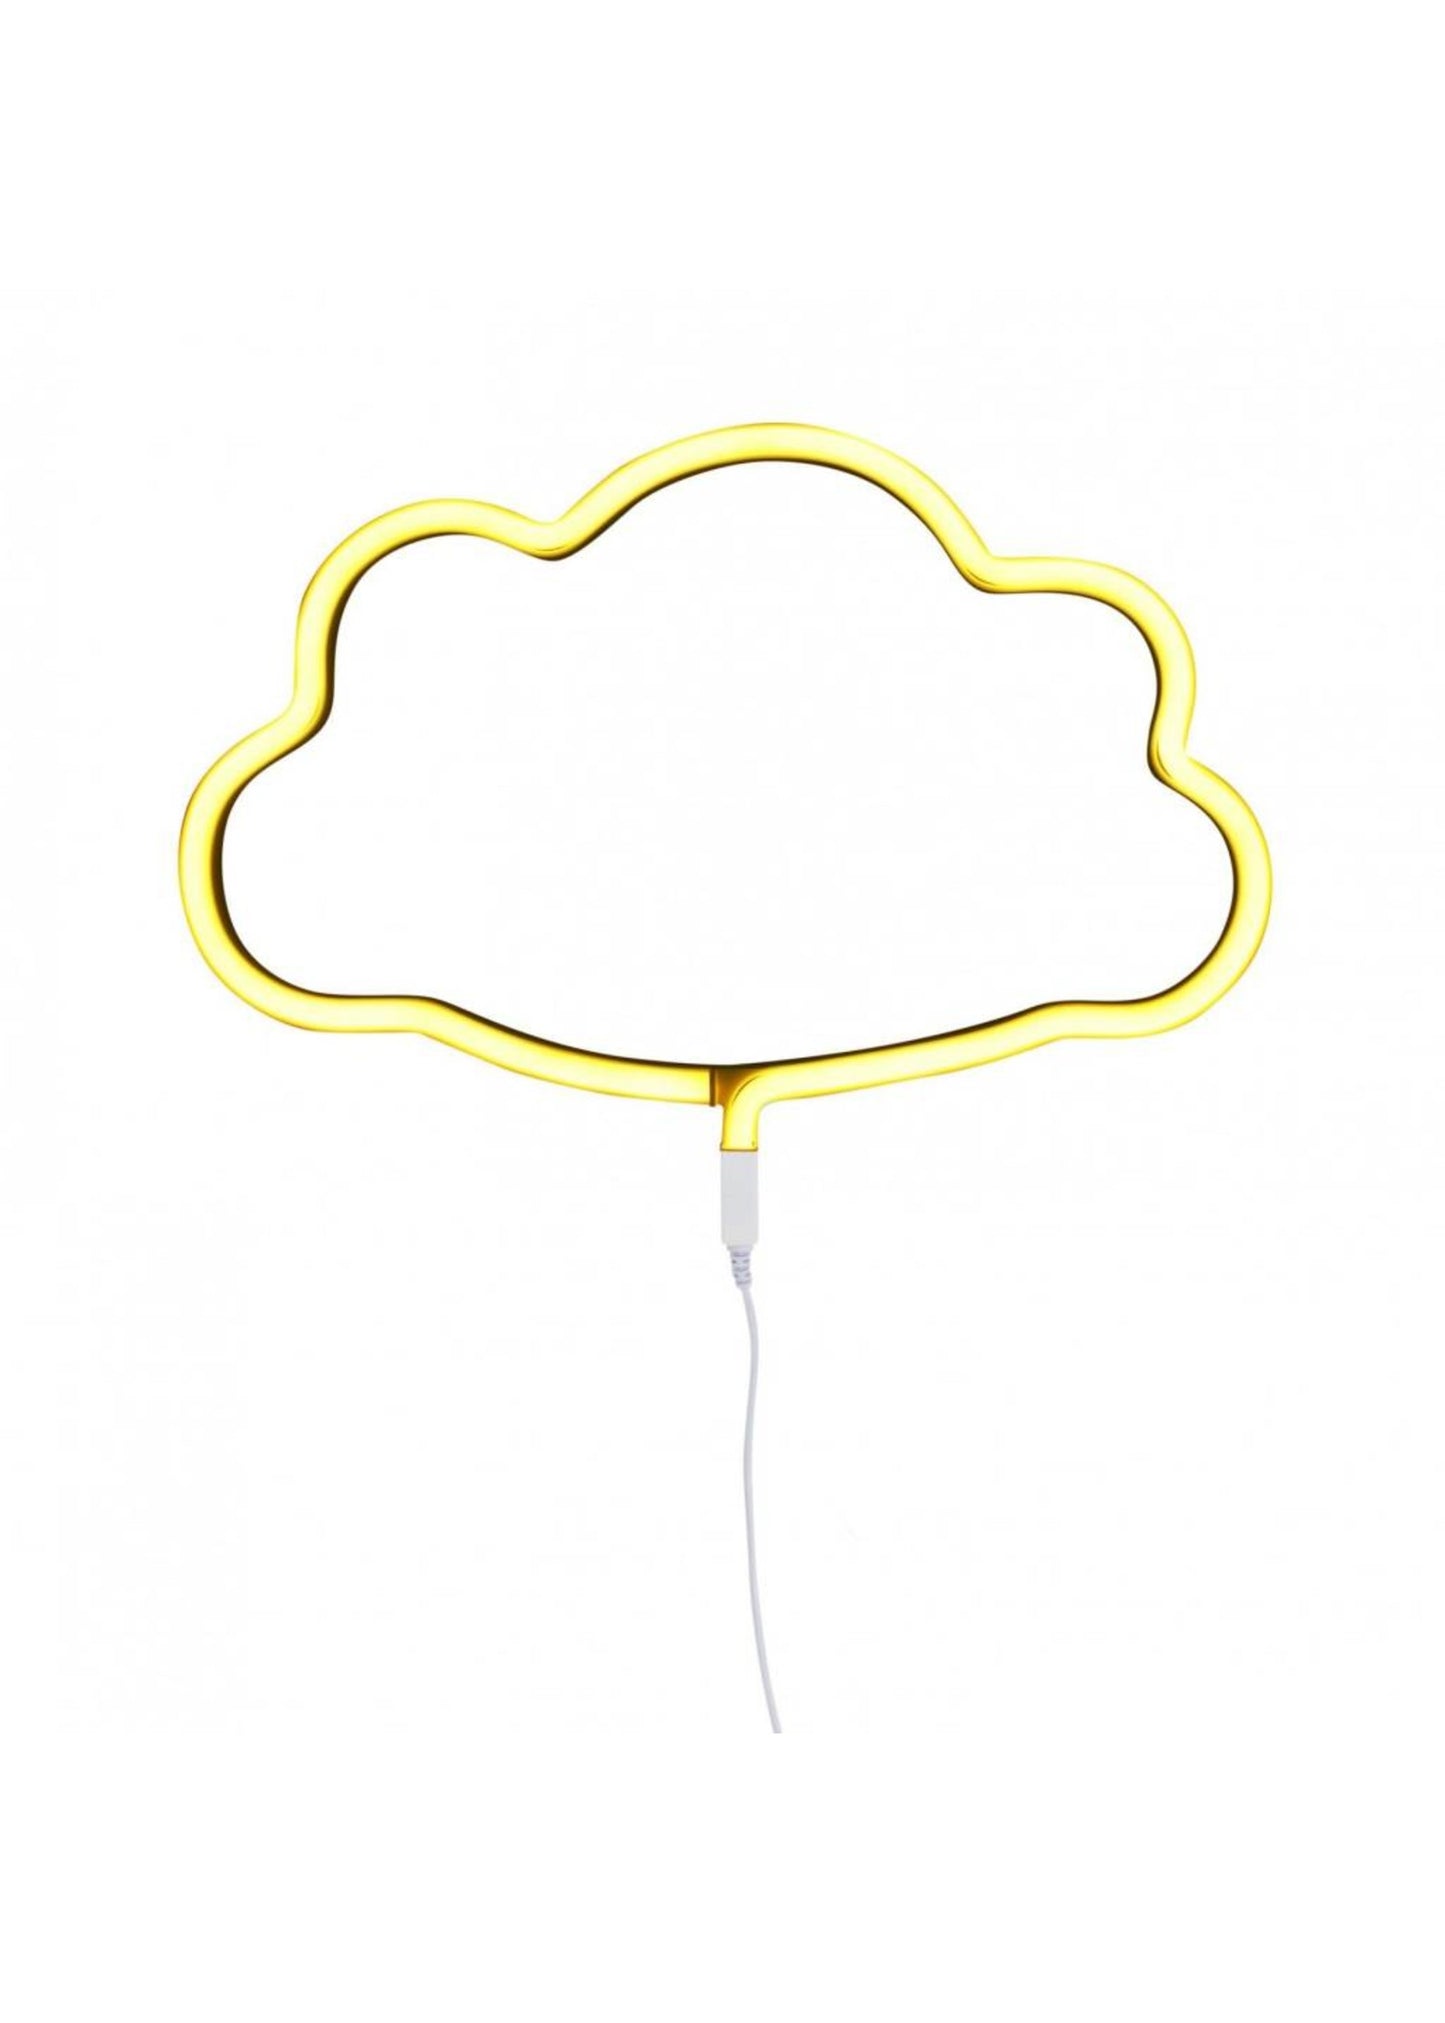 A Little Lovely Company Neon Light: Cloud - Yellow